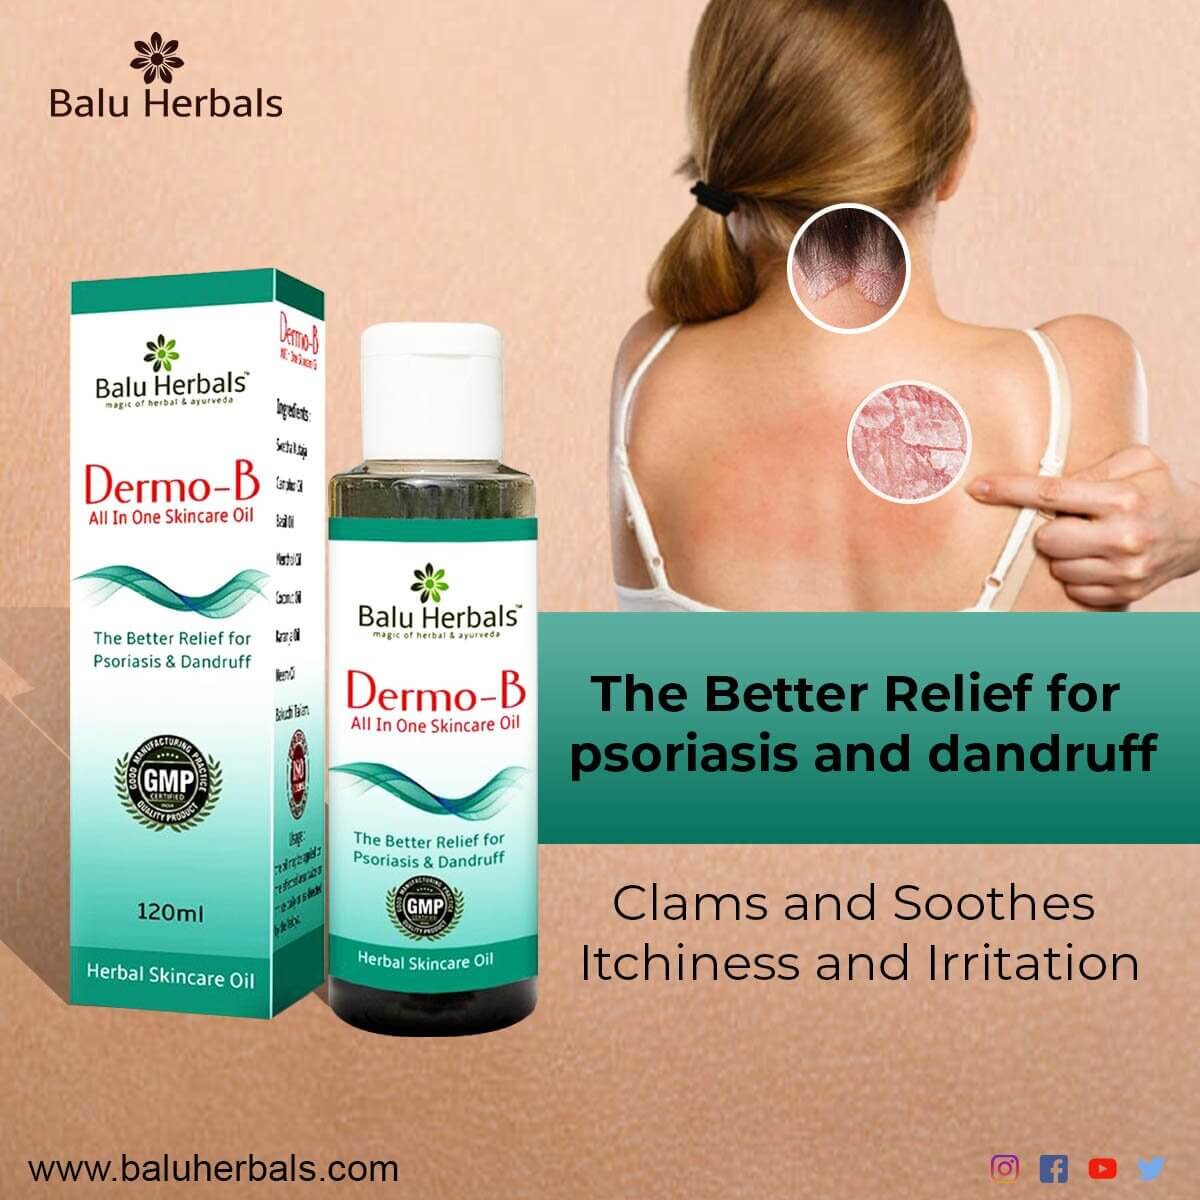 Dermo - B for all skin problems itching, rashes, burning, dandruff